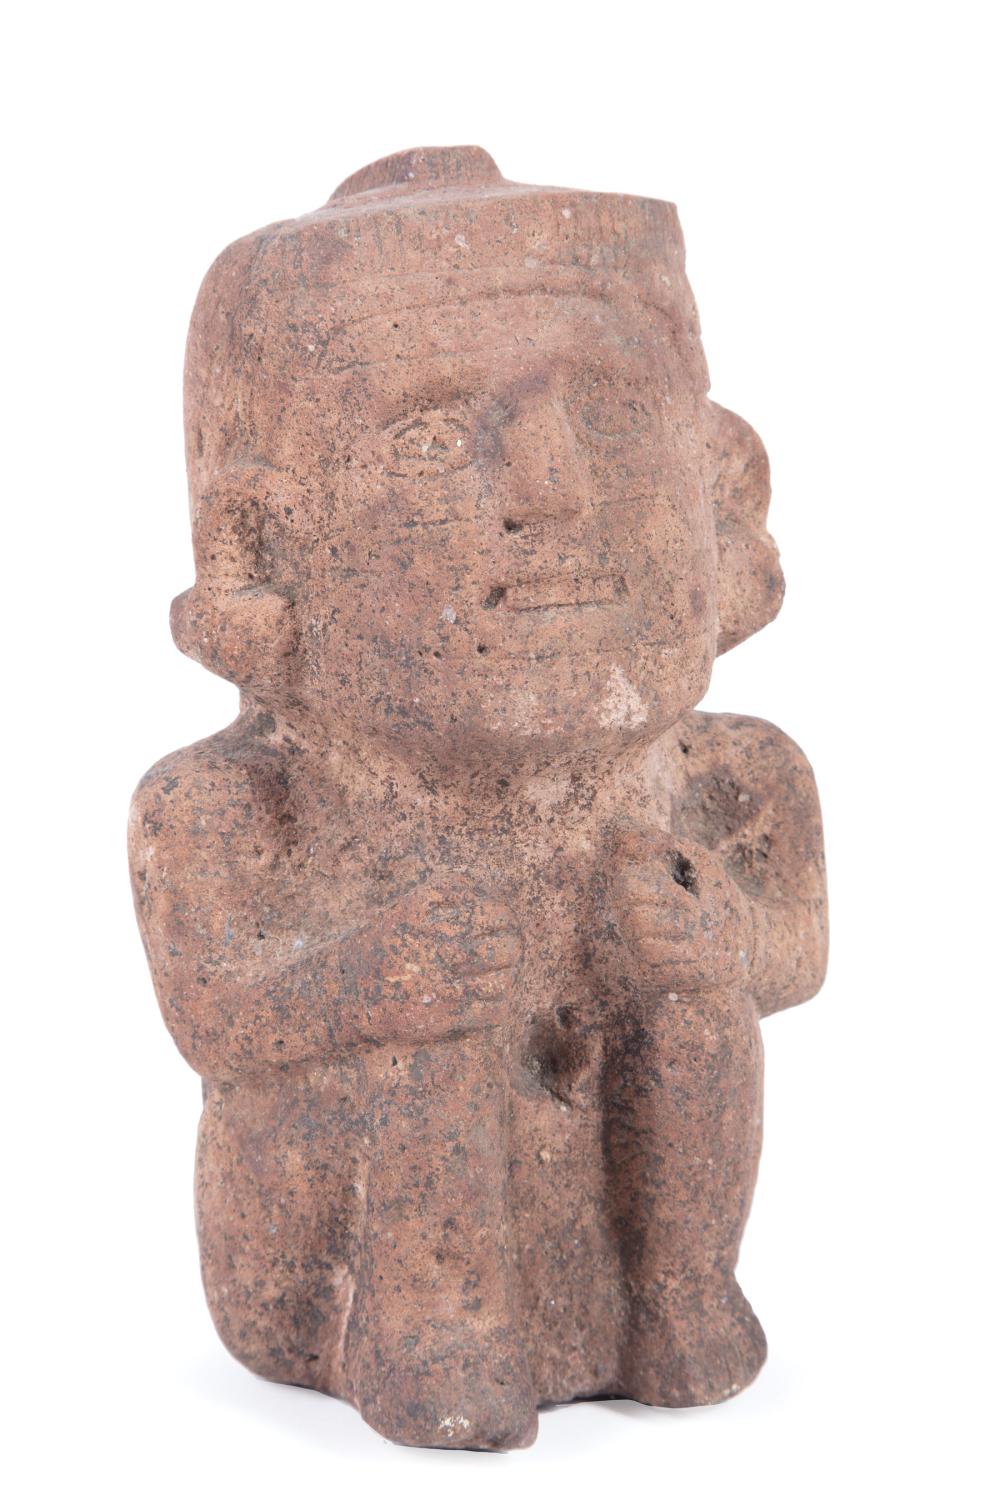 PRE-COLUMBIAN CARVED STONE EFFIGY